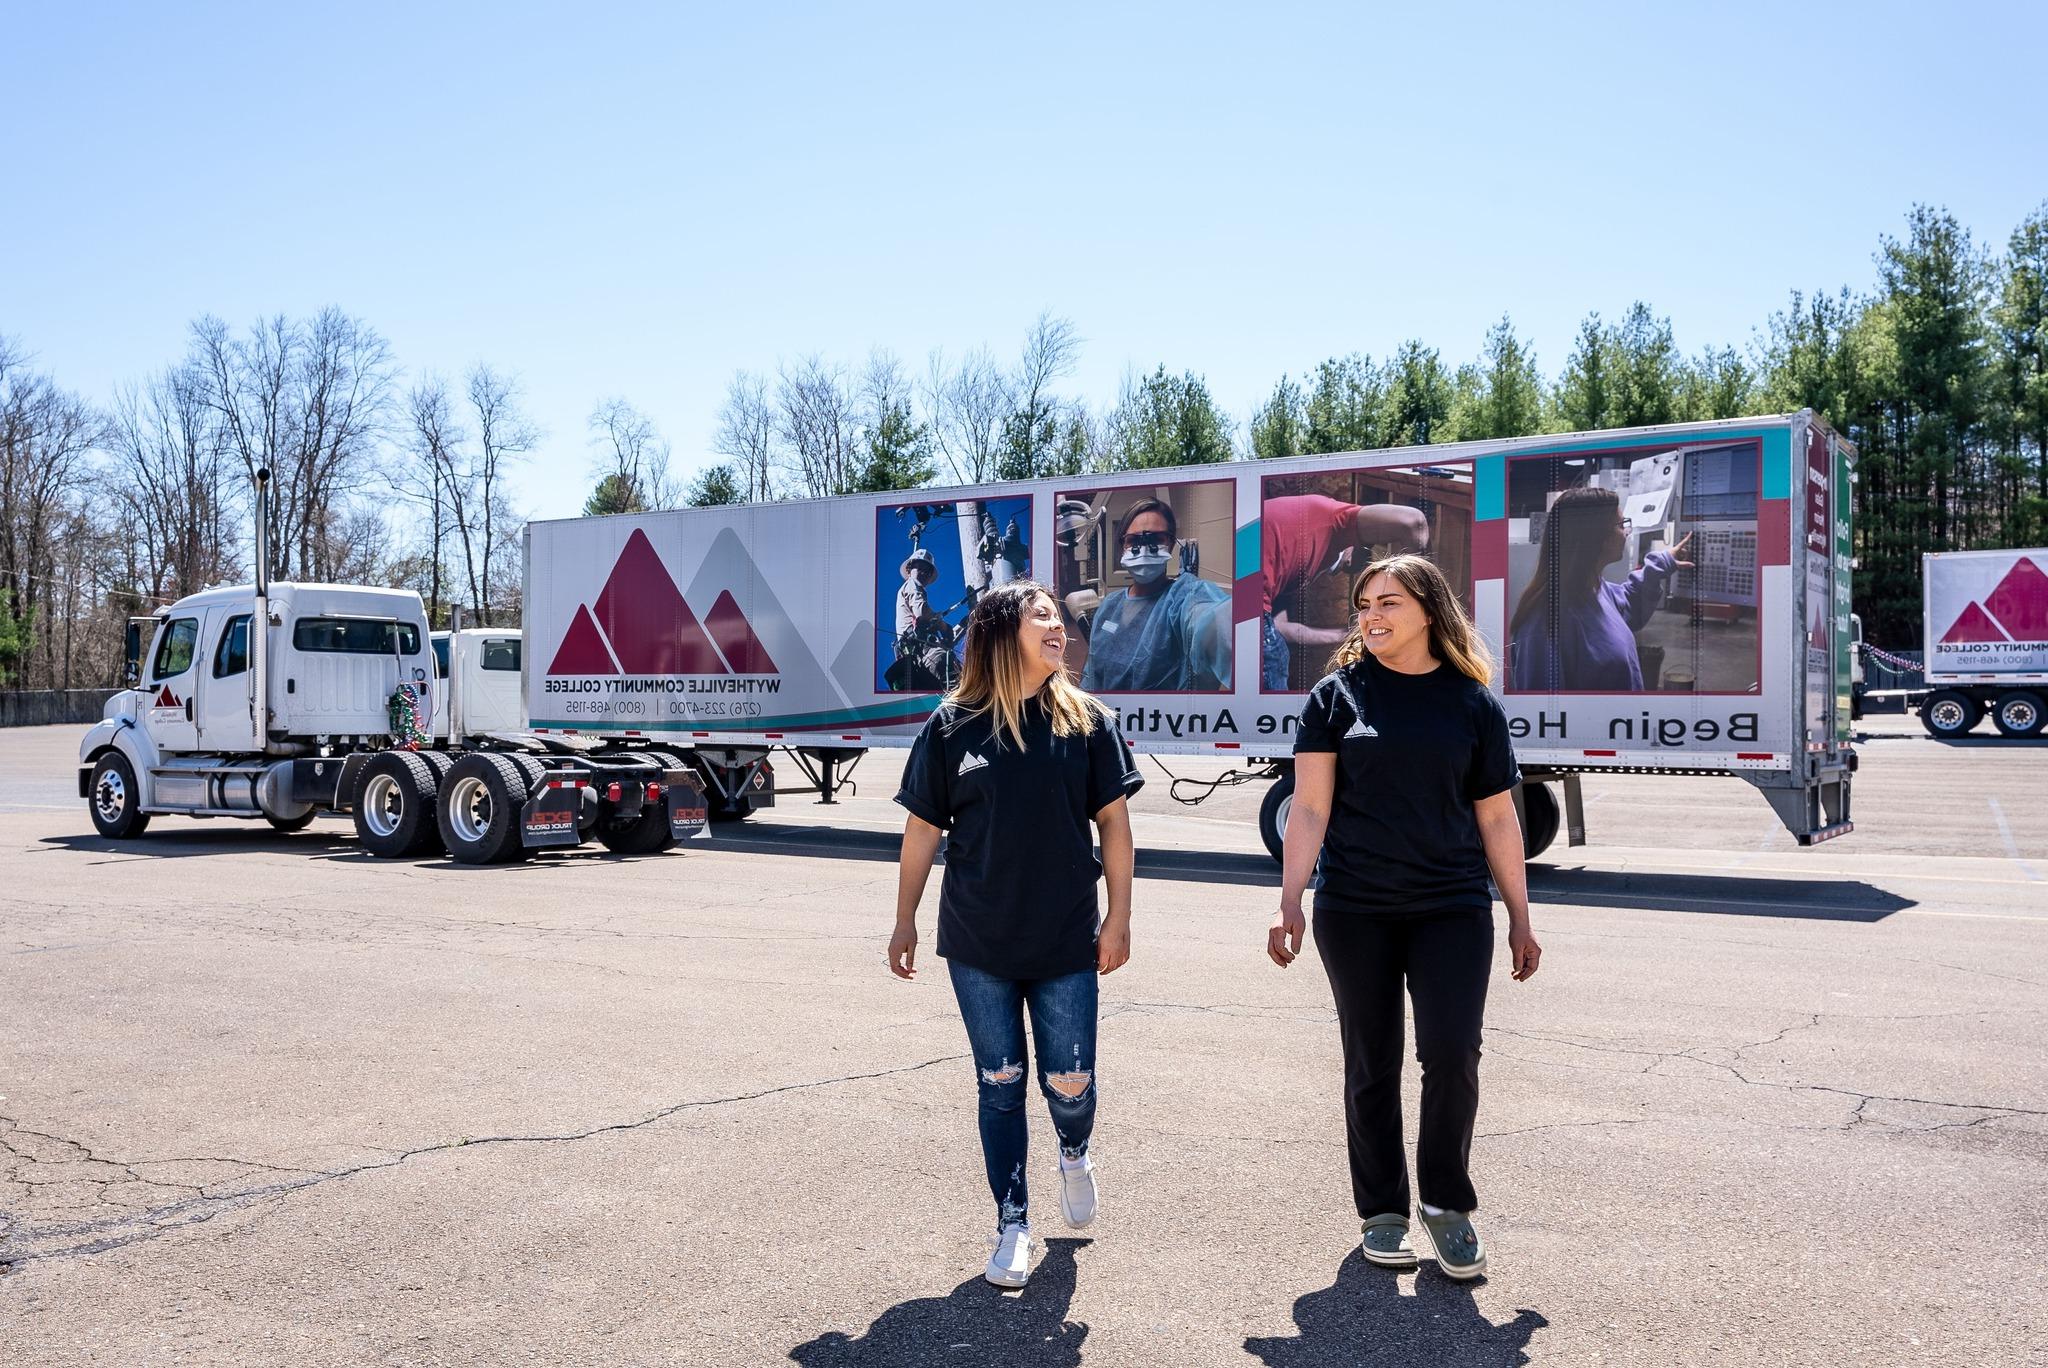 Try WCC's Commercial Truck Driving/CDL Program, and earn a CDL in four weeks, or in eight weekends! 

Class offerings: May 1- May 29;  May 30-June 27; or, Saturday and Sunday classes (8 weeks) - May 4-June 30

Call today to jump-start your new career! (276) 223-4867 

博彩平台网址大全
中国博彩平台.

在这里开始. 成为一名卡车司机. 

www.“.个电流.edu